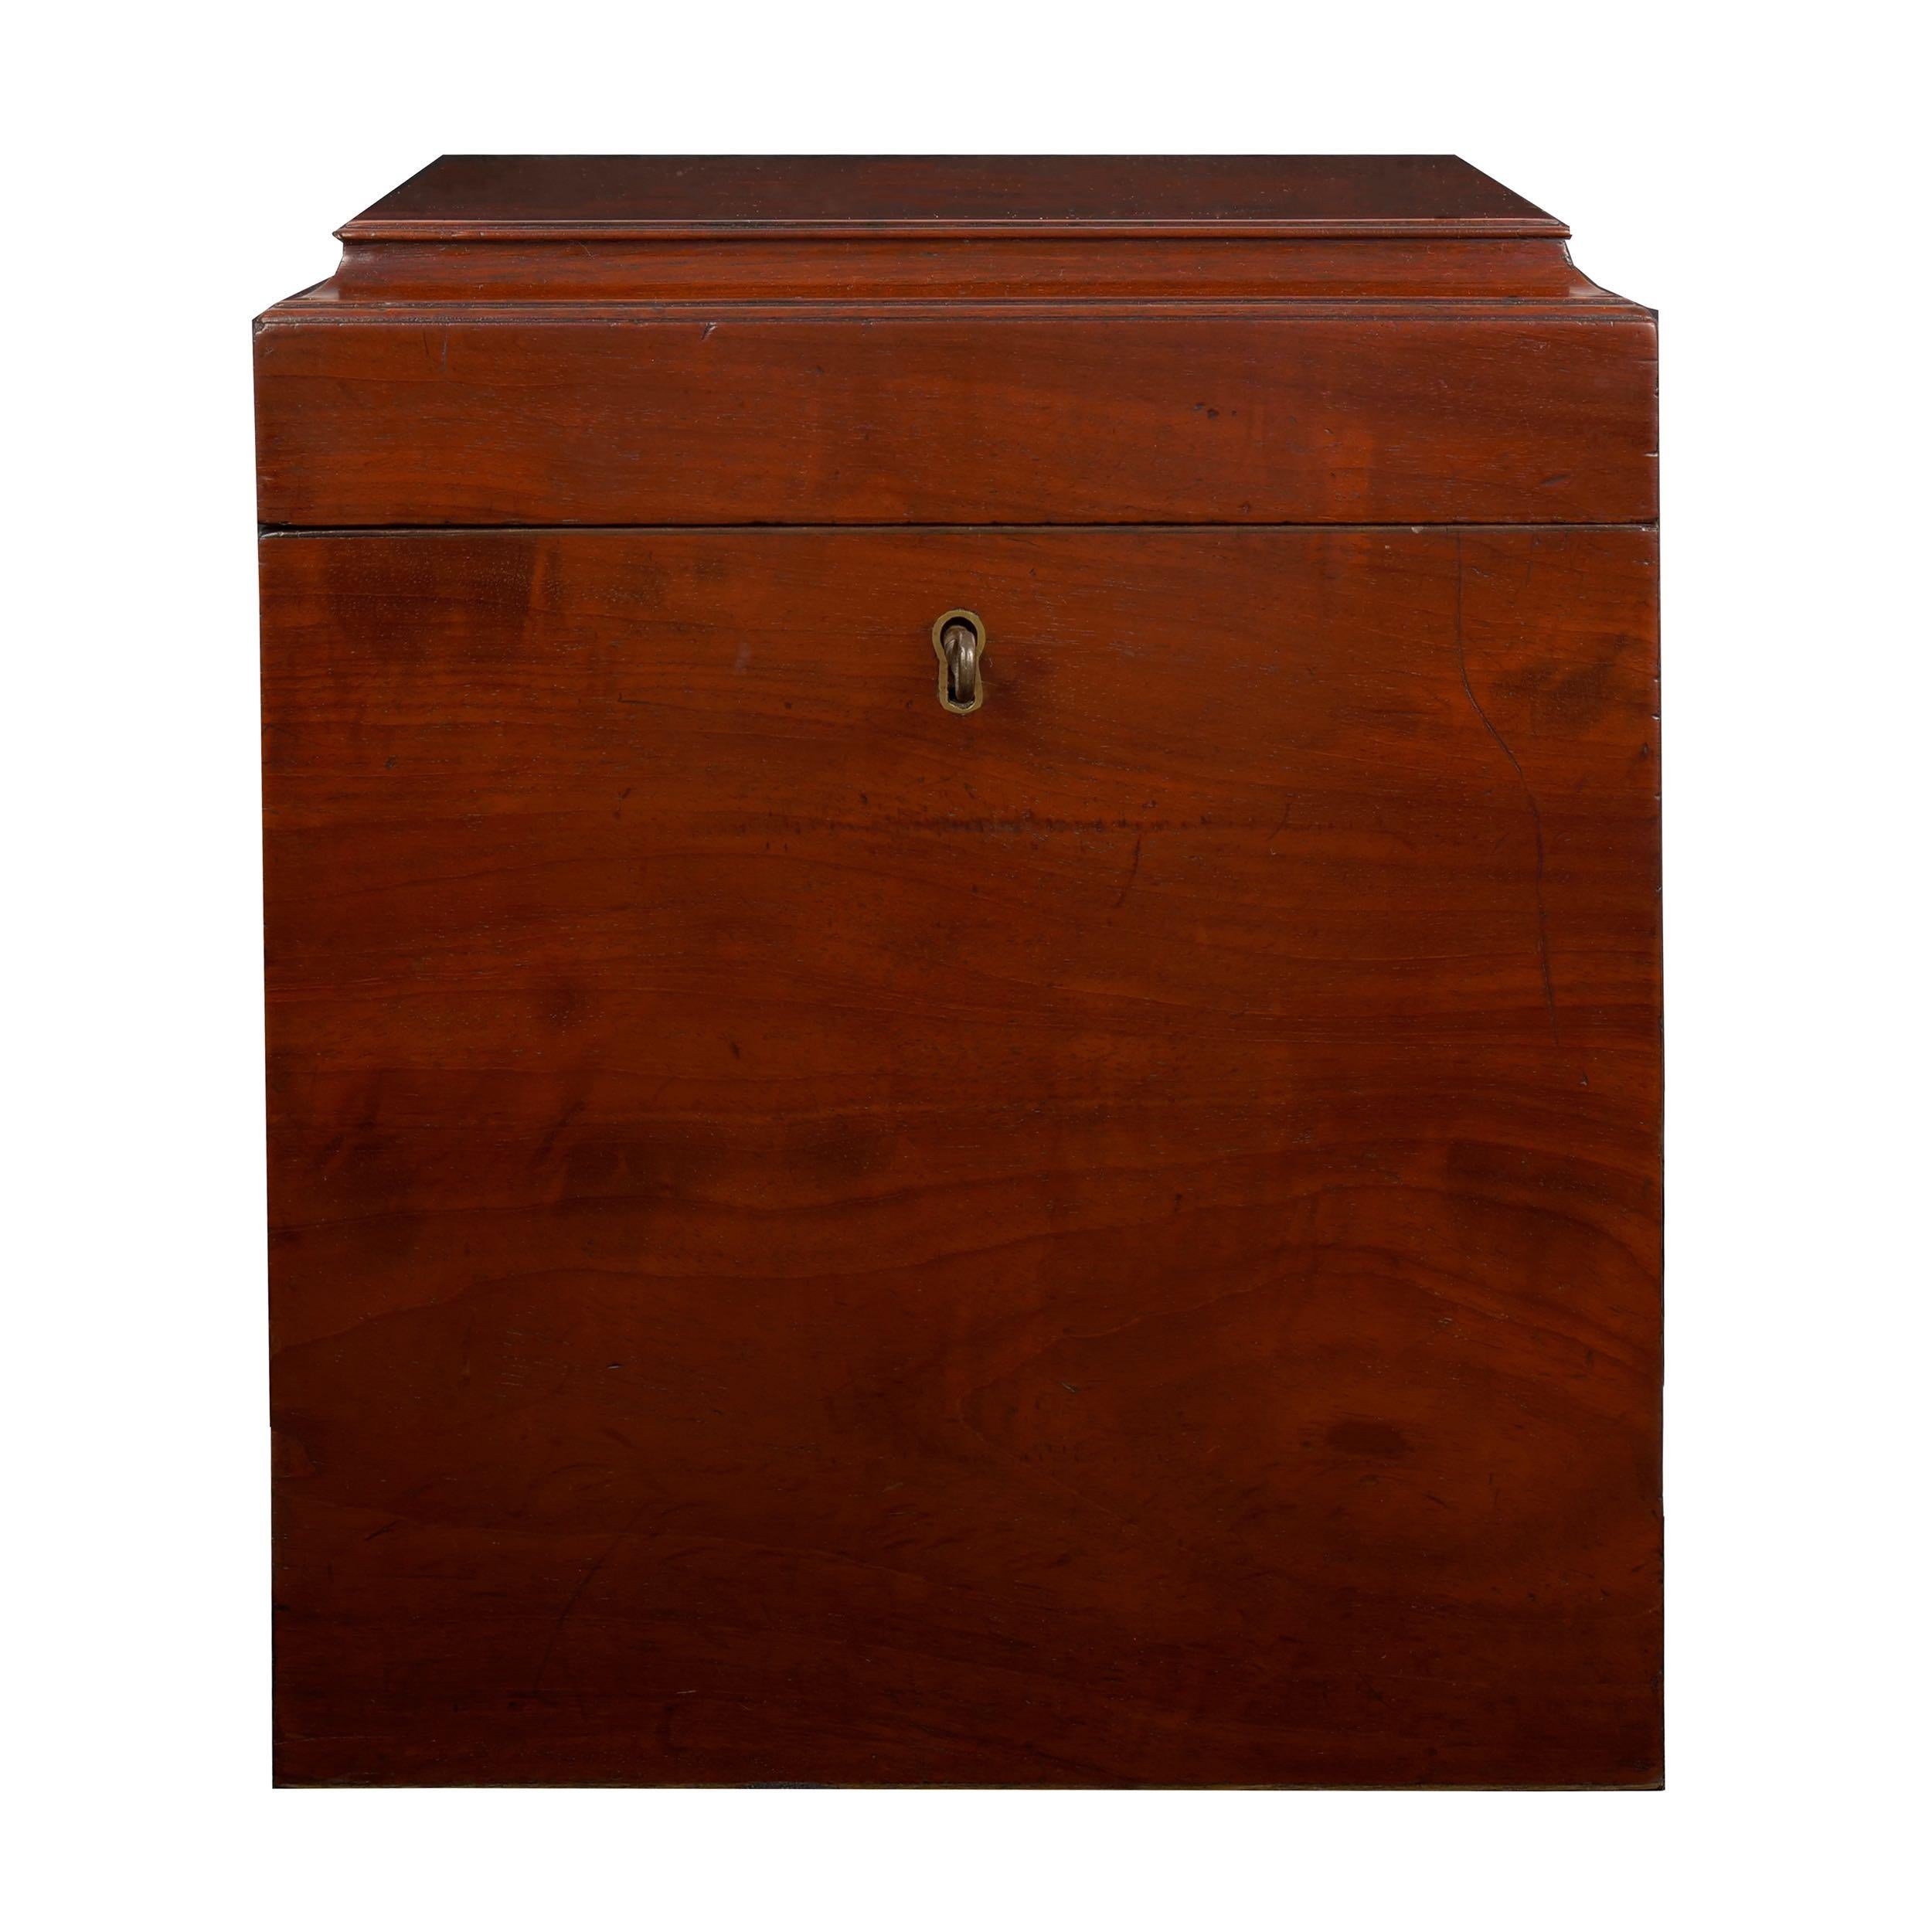 Fine George III mahogany document box
England, circa early 19th century
Item # C104021 

A very attractive and useful document box from the first quarter of the 19th century, this tidy and austere design is a product of the George III era.